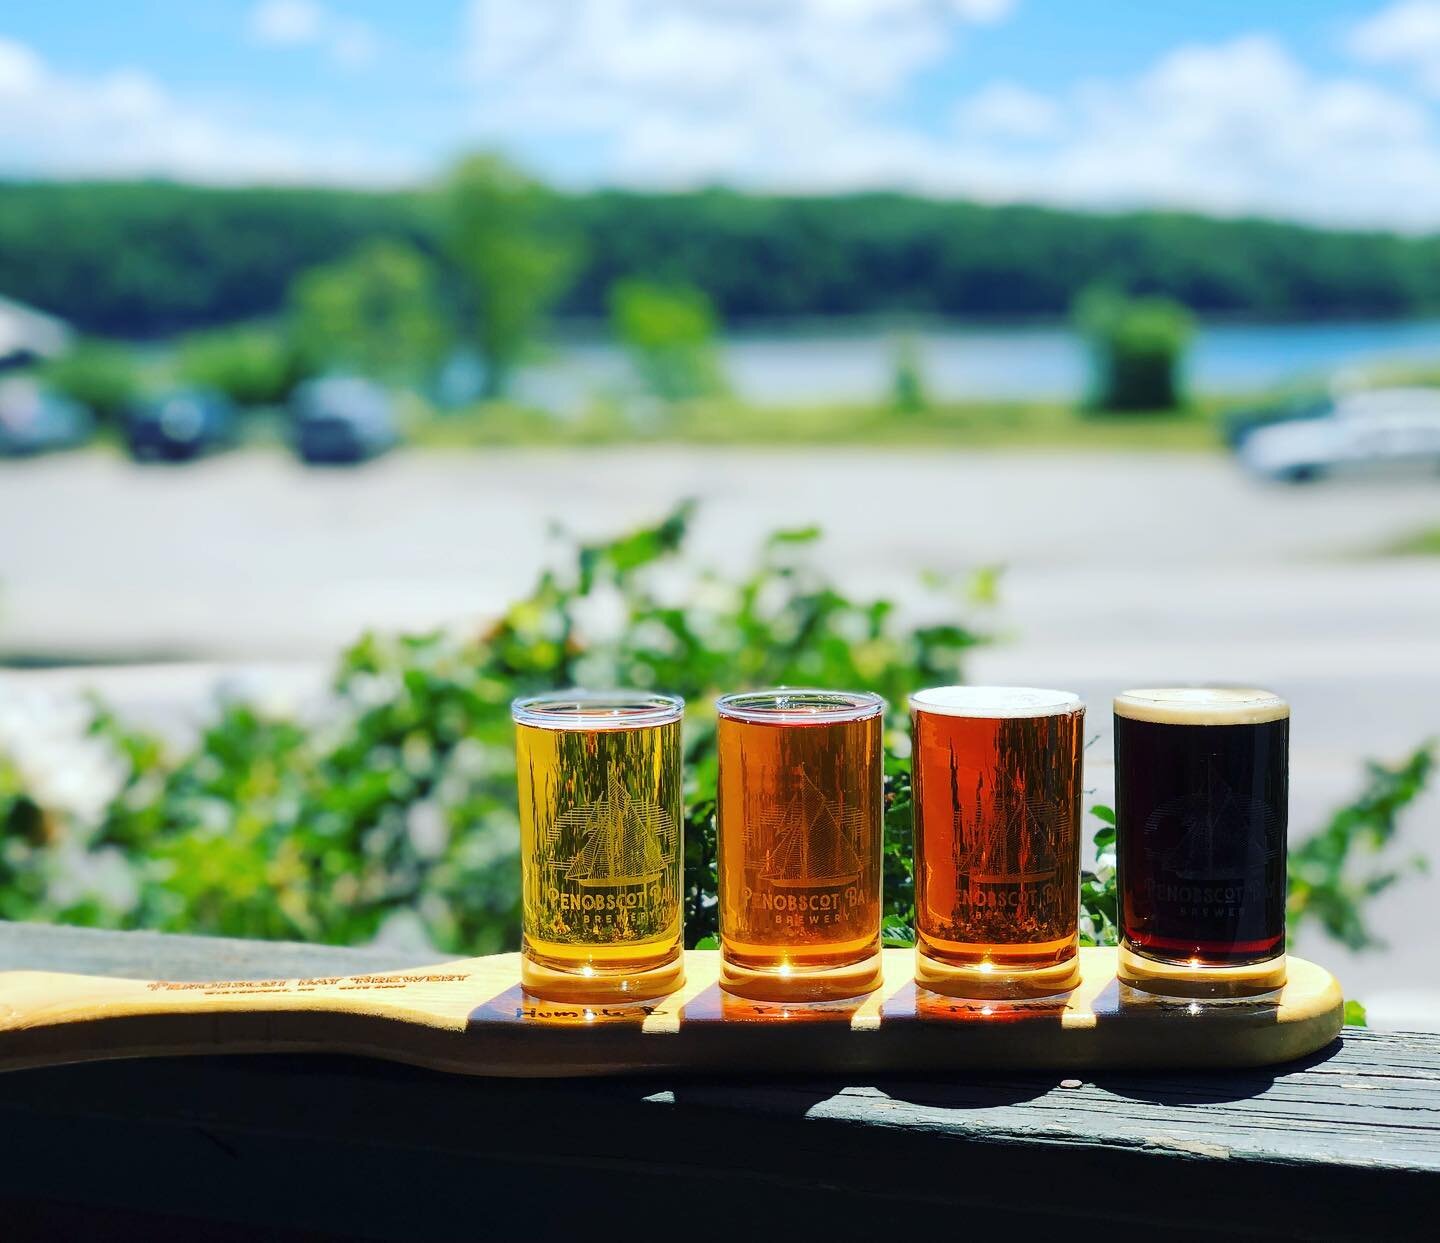 What a beautiful day for a flight on our porch overlooking the Penobscot River. 

It&rsquo;s Friday&hellip;treat yourself! Kick off the weekend right. 

Remember, we are open until 8pm today, 11am-8pm tomorrow, and 11am-6pm Sunday. 

Cheers! 🍻 🍷 

